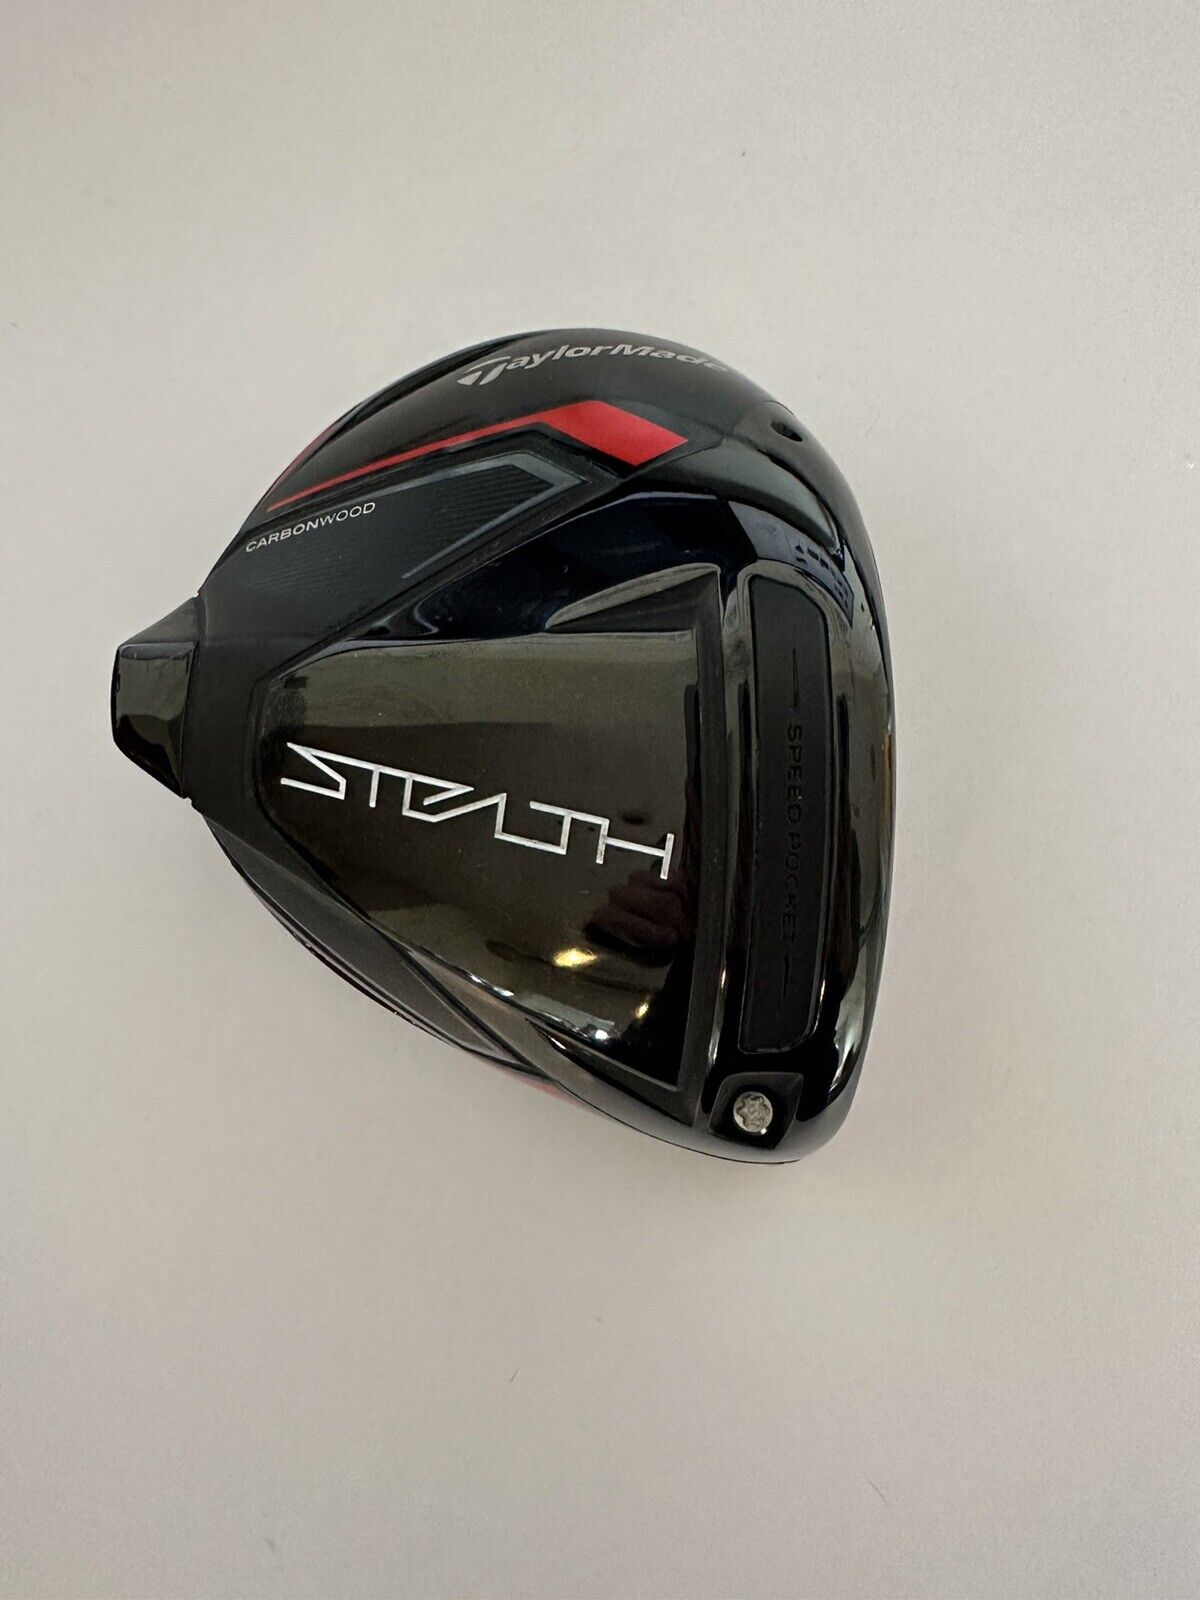 TaylorMade Stealth Driver 9.0* - Club Head Only - Barely Used